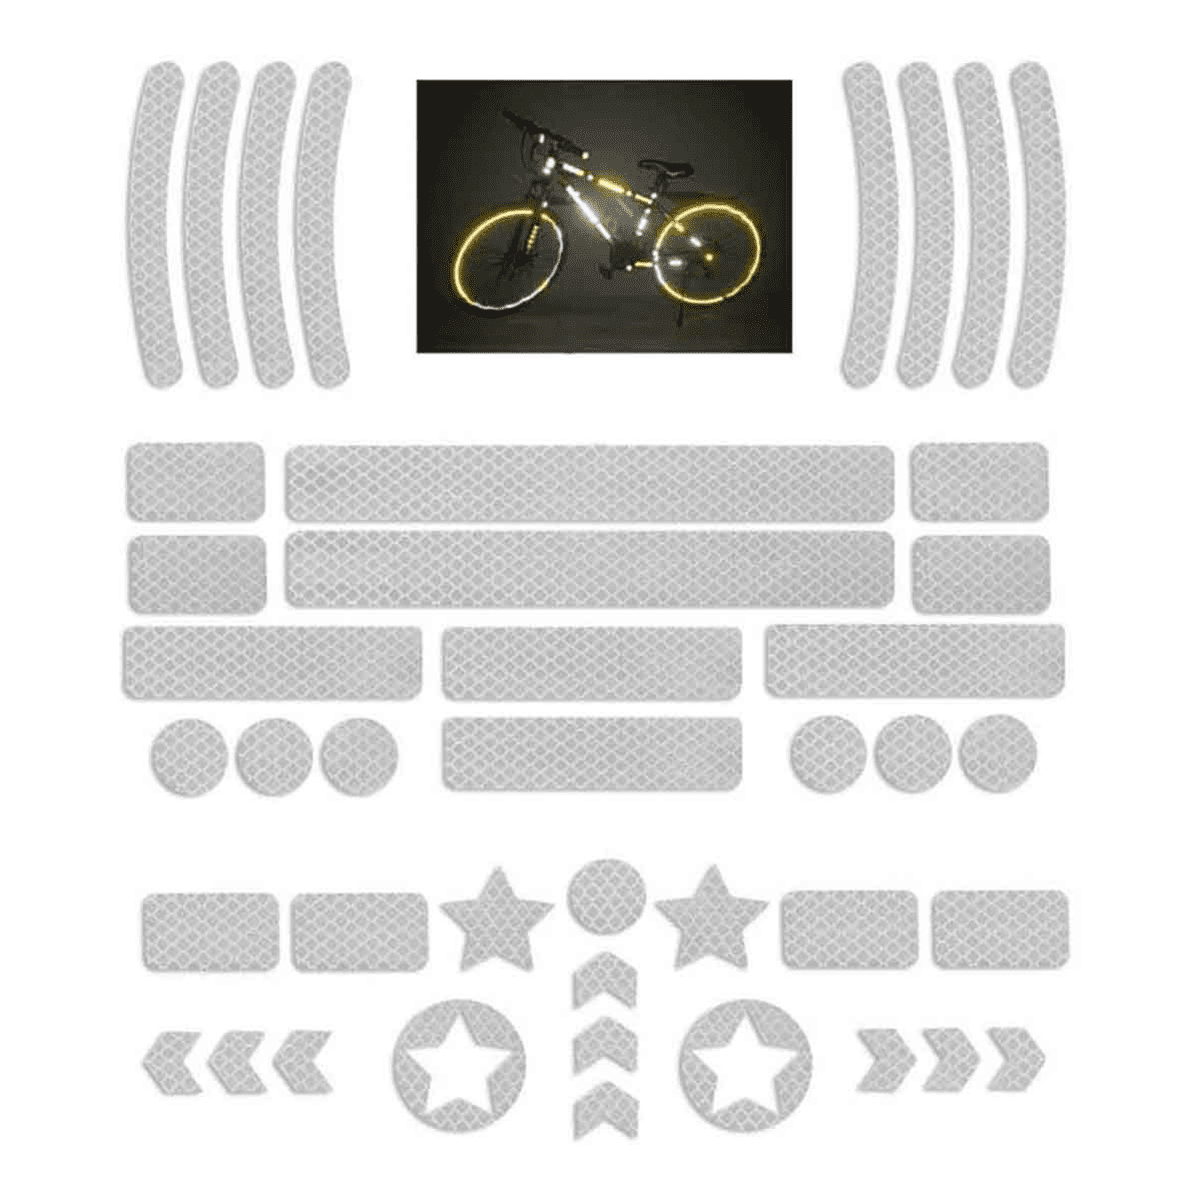 self-Adhesive and Highly Reflective Weatherproof Sticker. Bicycles Helmets with Stickers 21 Pieces high Quality reflectors Stickers HiPerformance Reflective Film Set for Safety Marking of prams